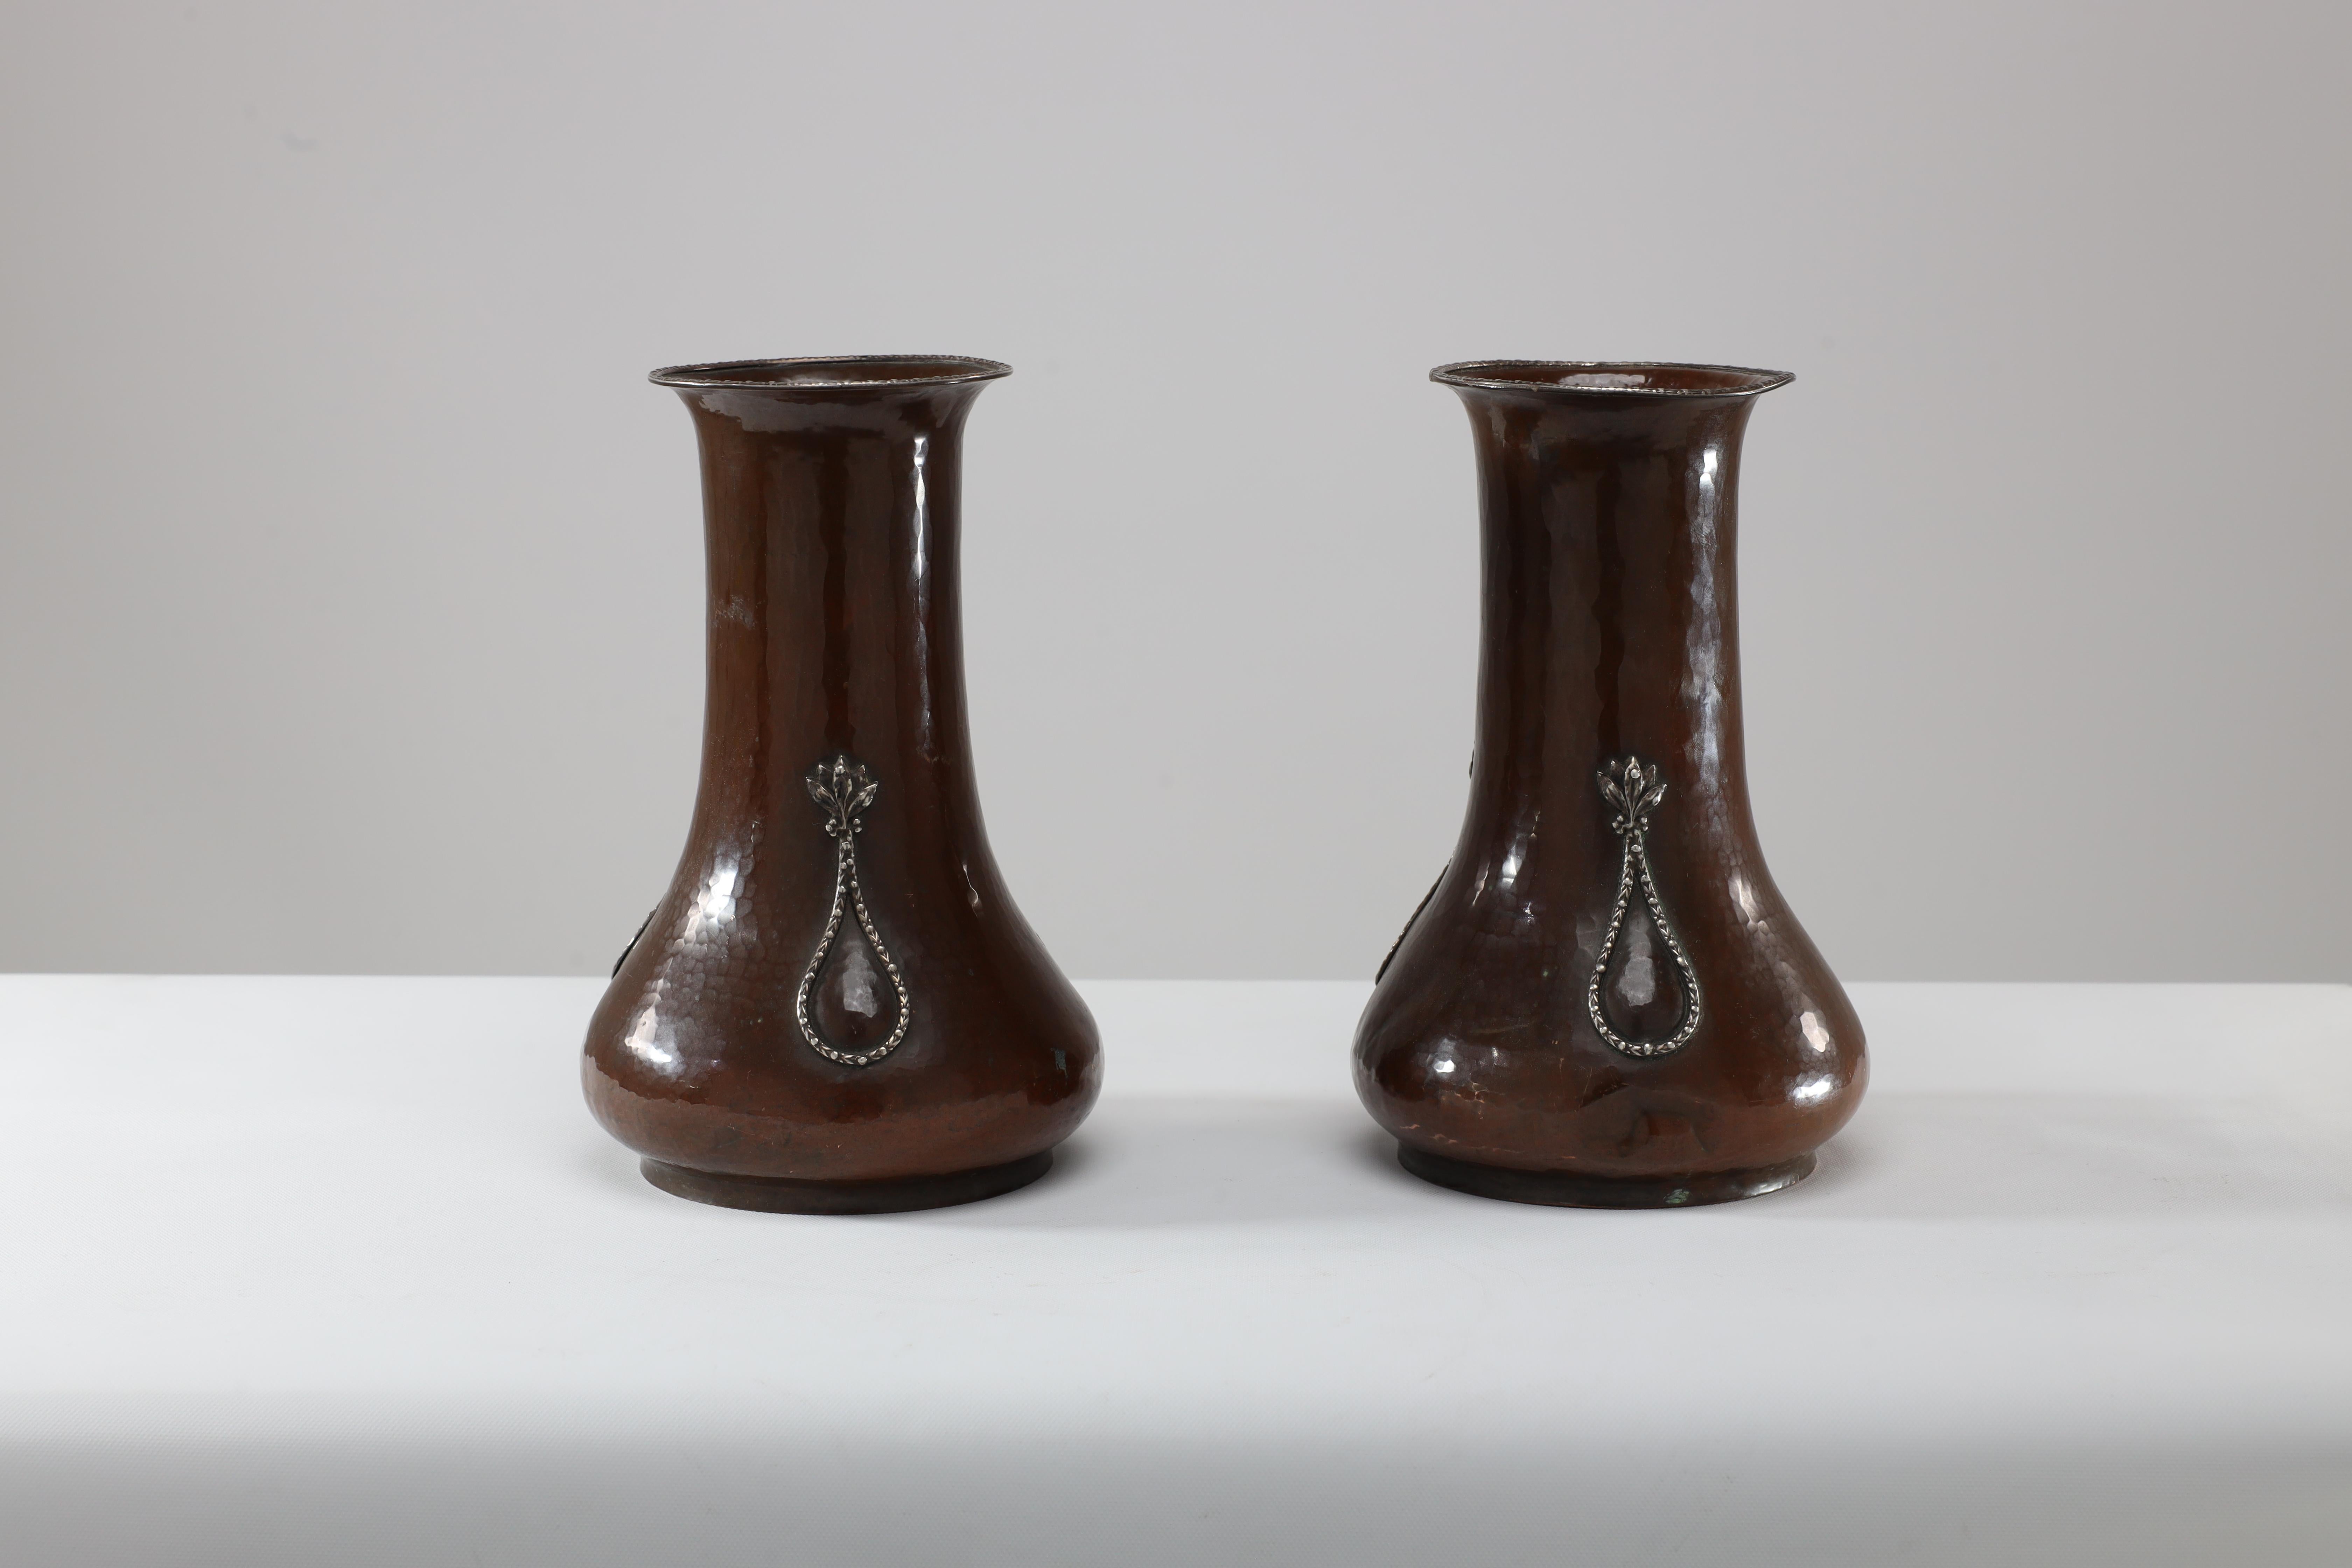 A E Jones. A pair of Arts and Crafts hand-hammered copper vases with silver teardrop decorationThe fine silver decoration to the rim and to the teardrop decoration is an egg and dart pattern, the teardrop surmounted with leaf detailing. A E Jones